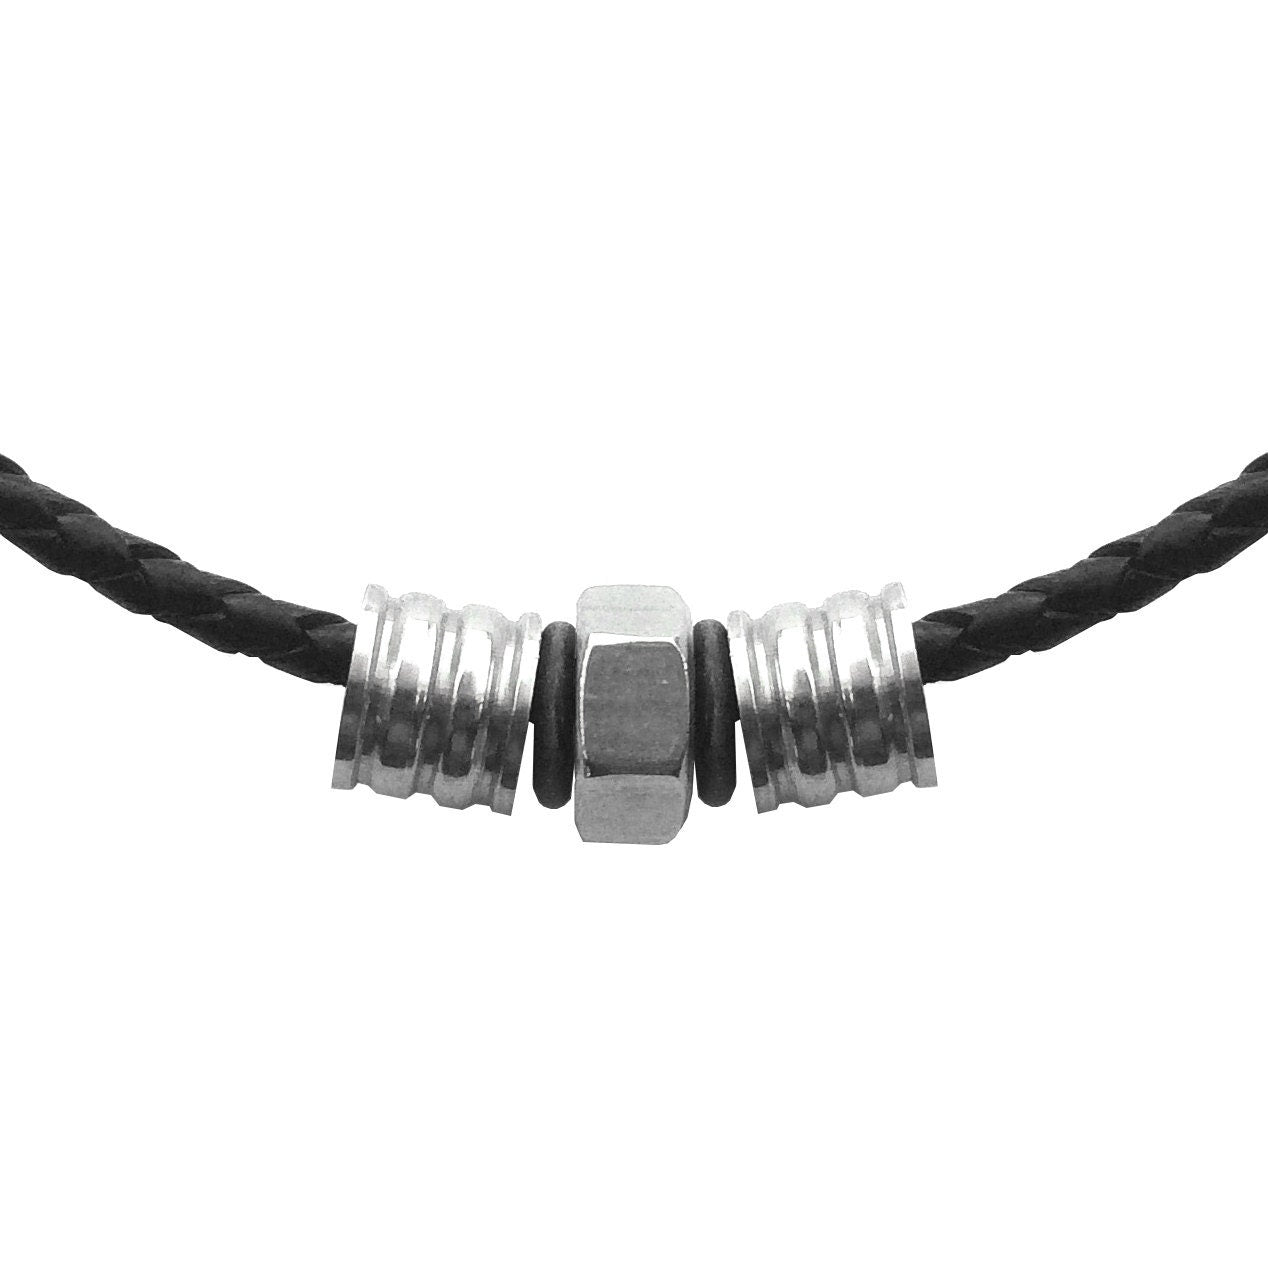 Mens Tribal Necklace, Black Leather Cord, Stainless Steel Jewelry, Gifts for Him, industrial Jewelry, 16 -24 Inch Lengths Available